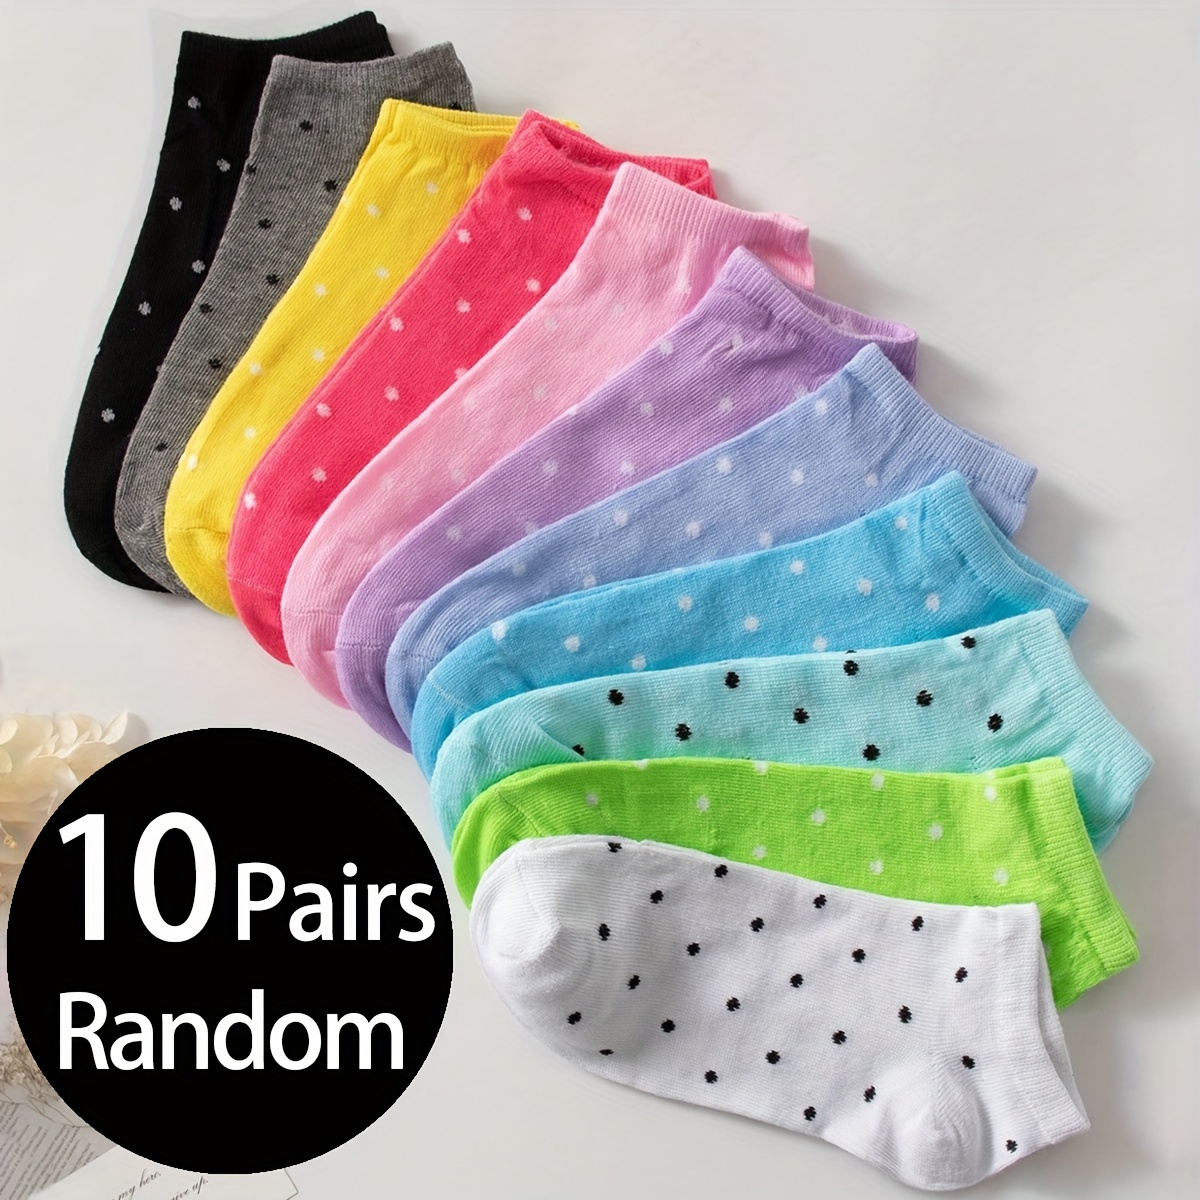 

10 Pairs Candy Color Polka Dot Socks, Casual & Breathable Ankle Socks, Women's Stockings & Hosiery